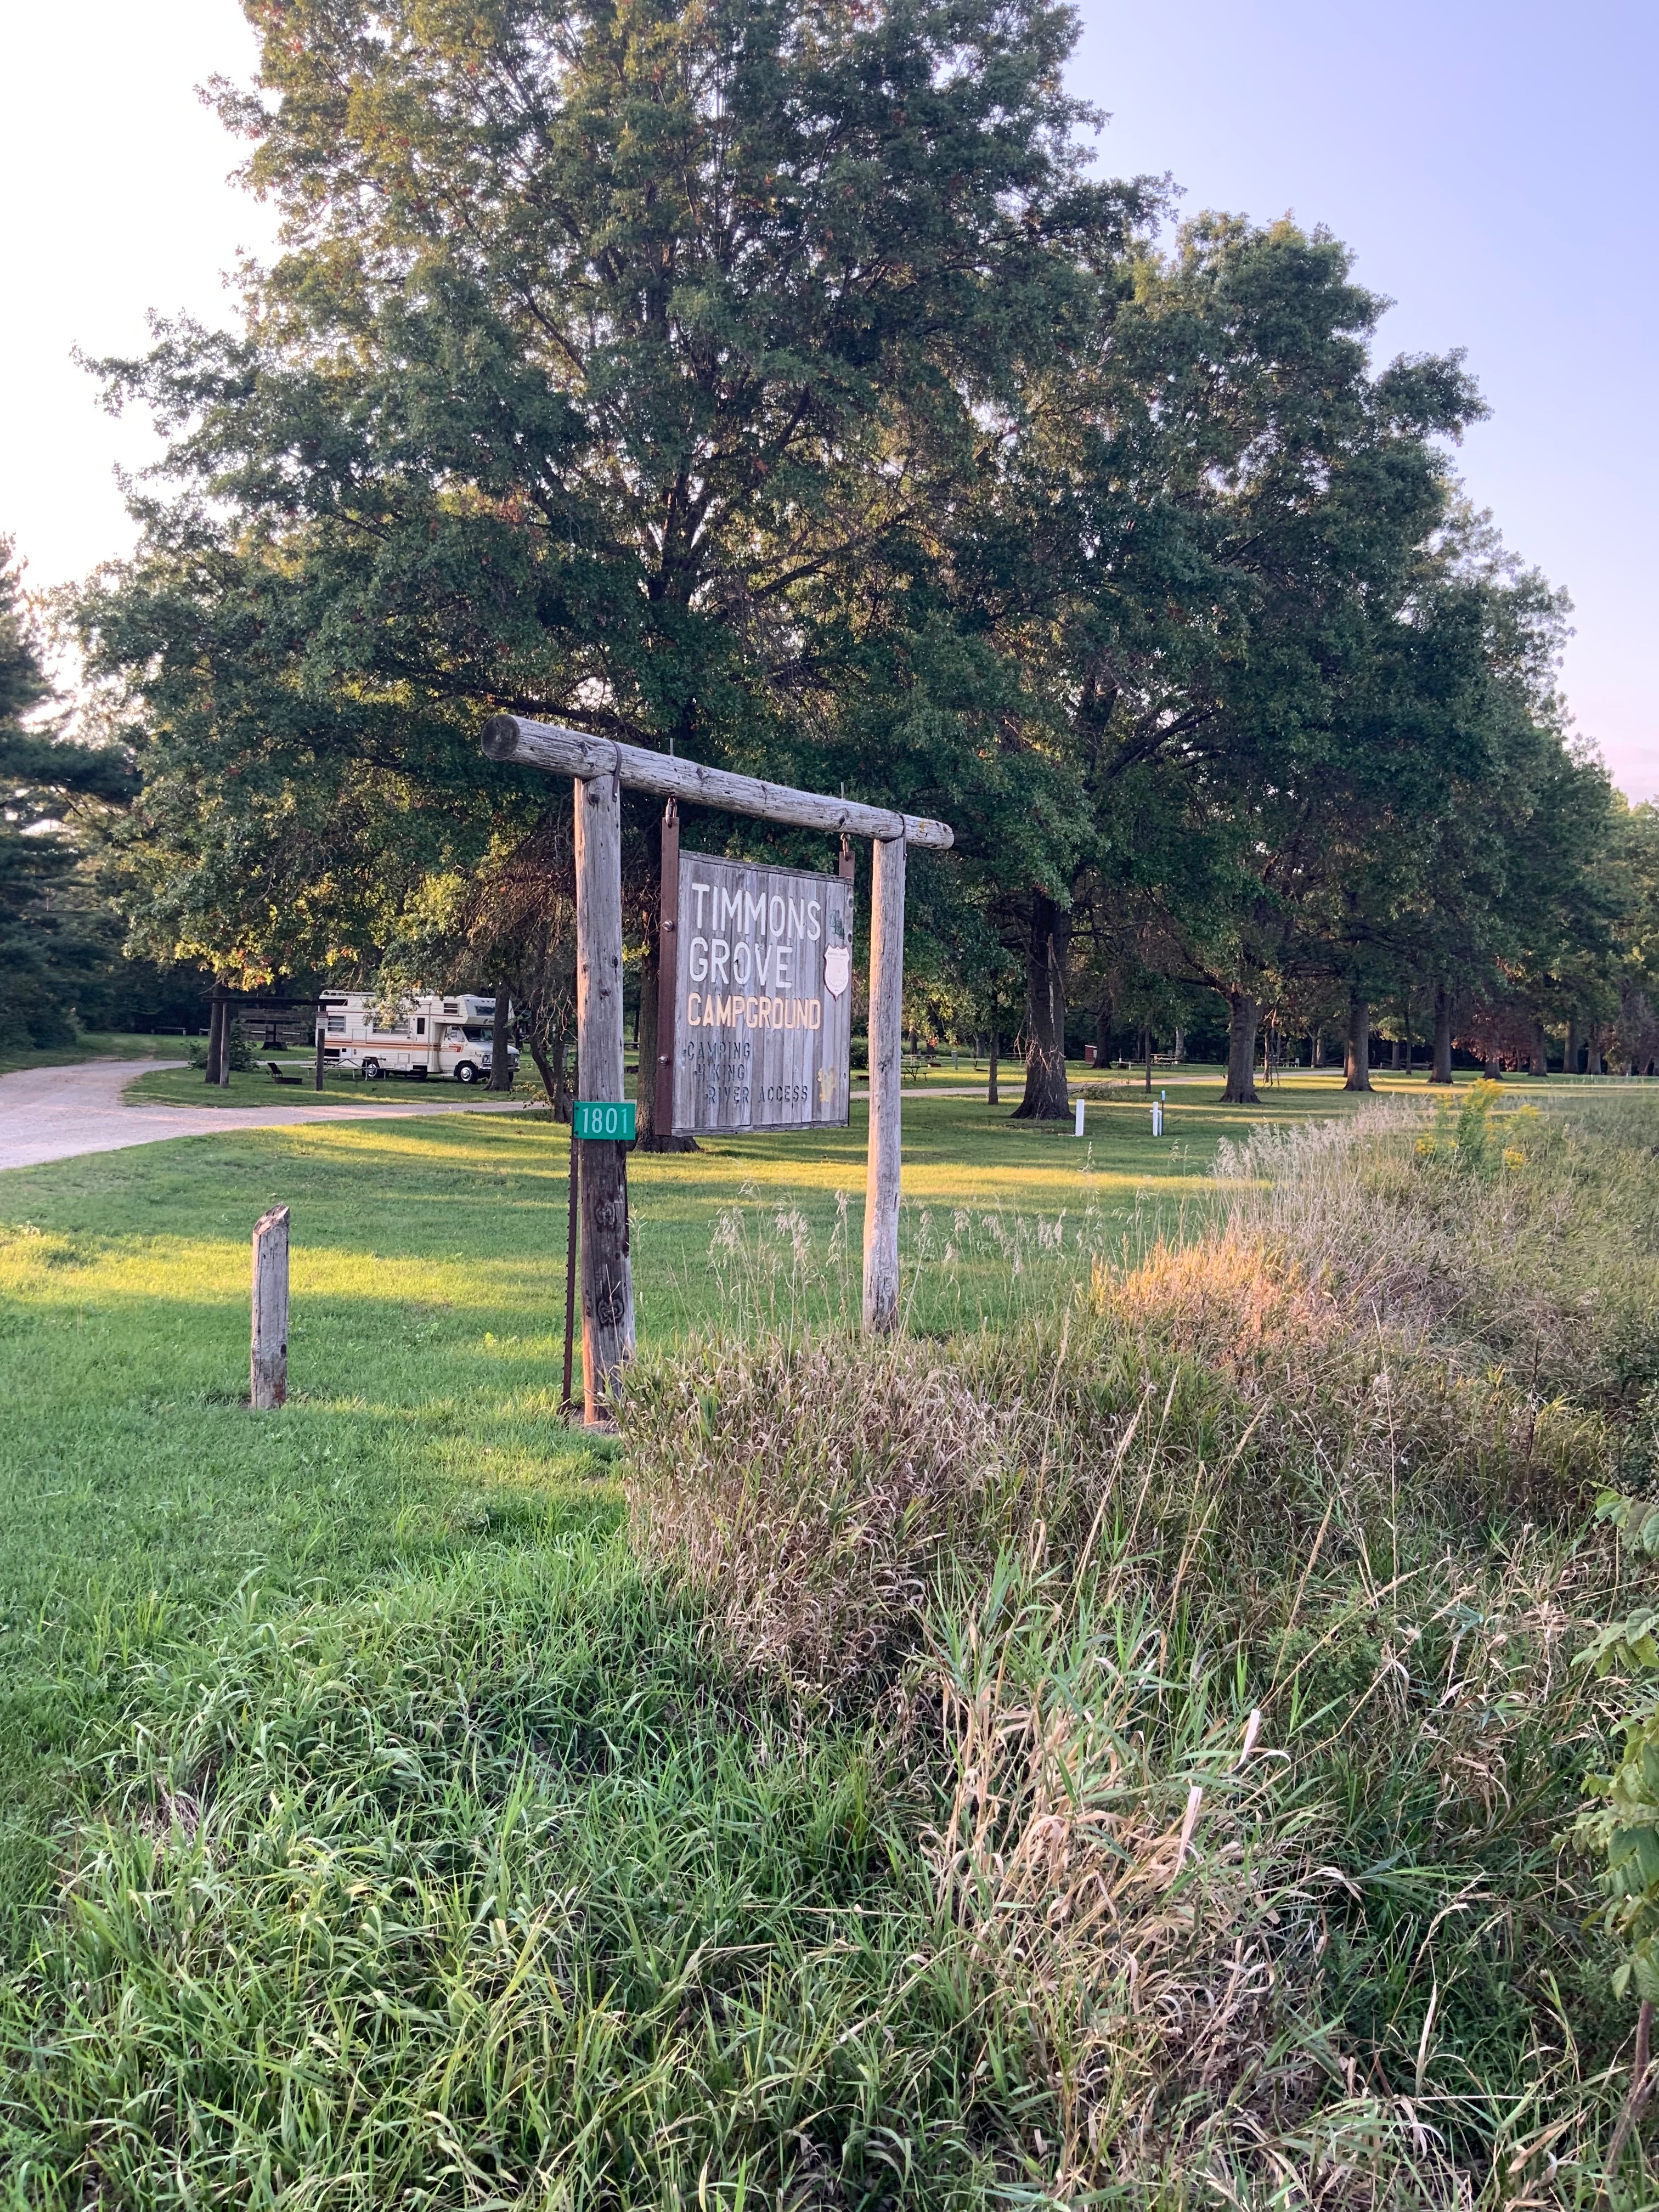 Camper submitted image from Timmons Grove County Park - 1